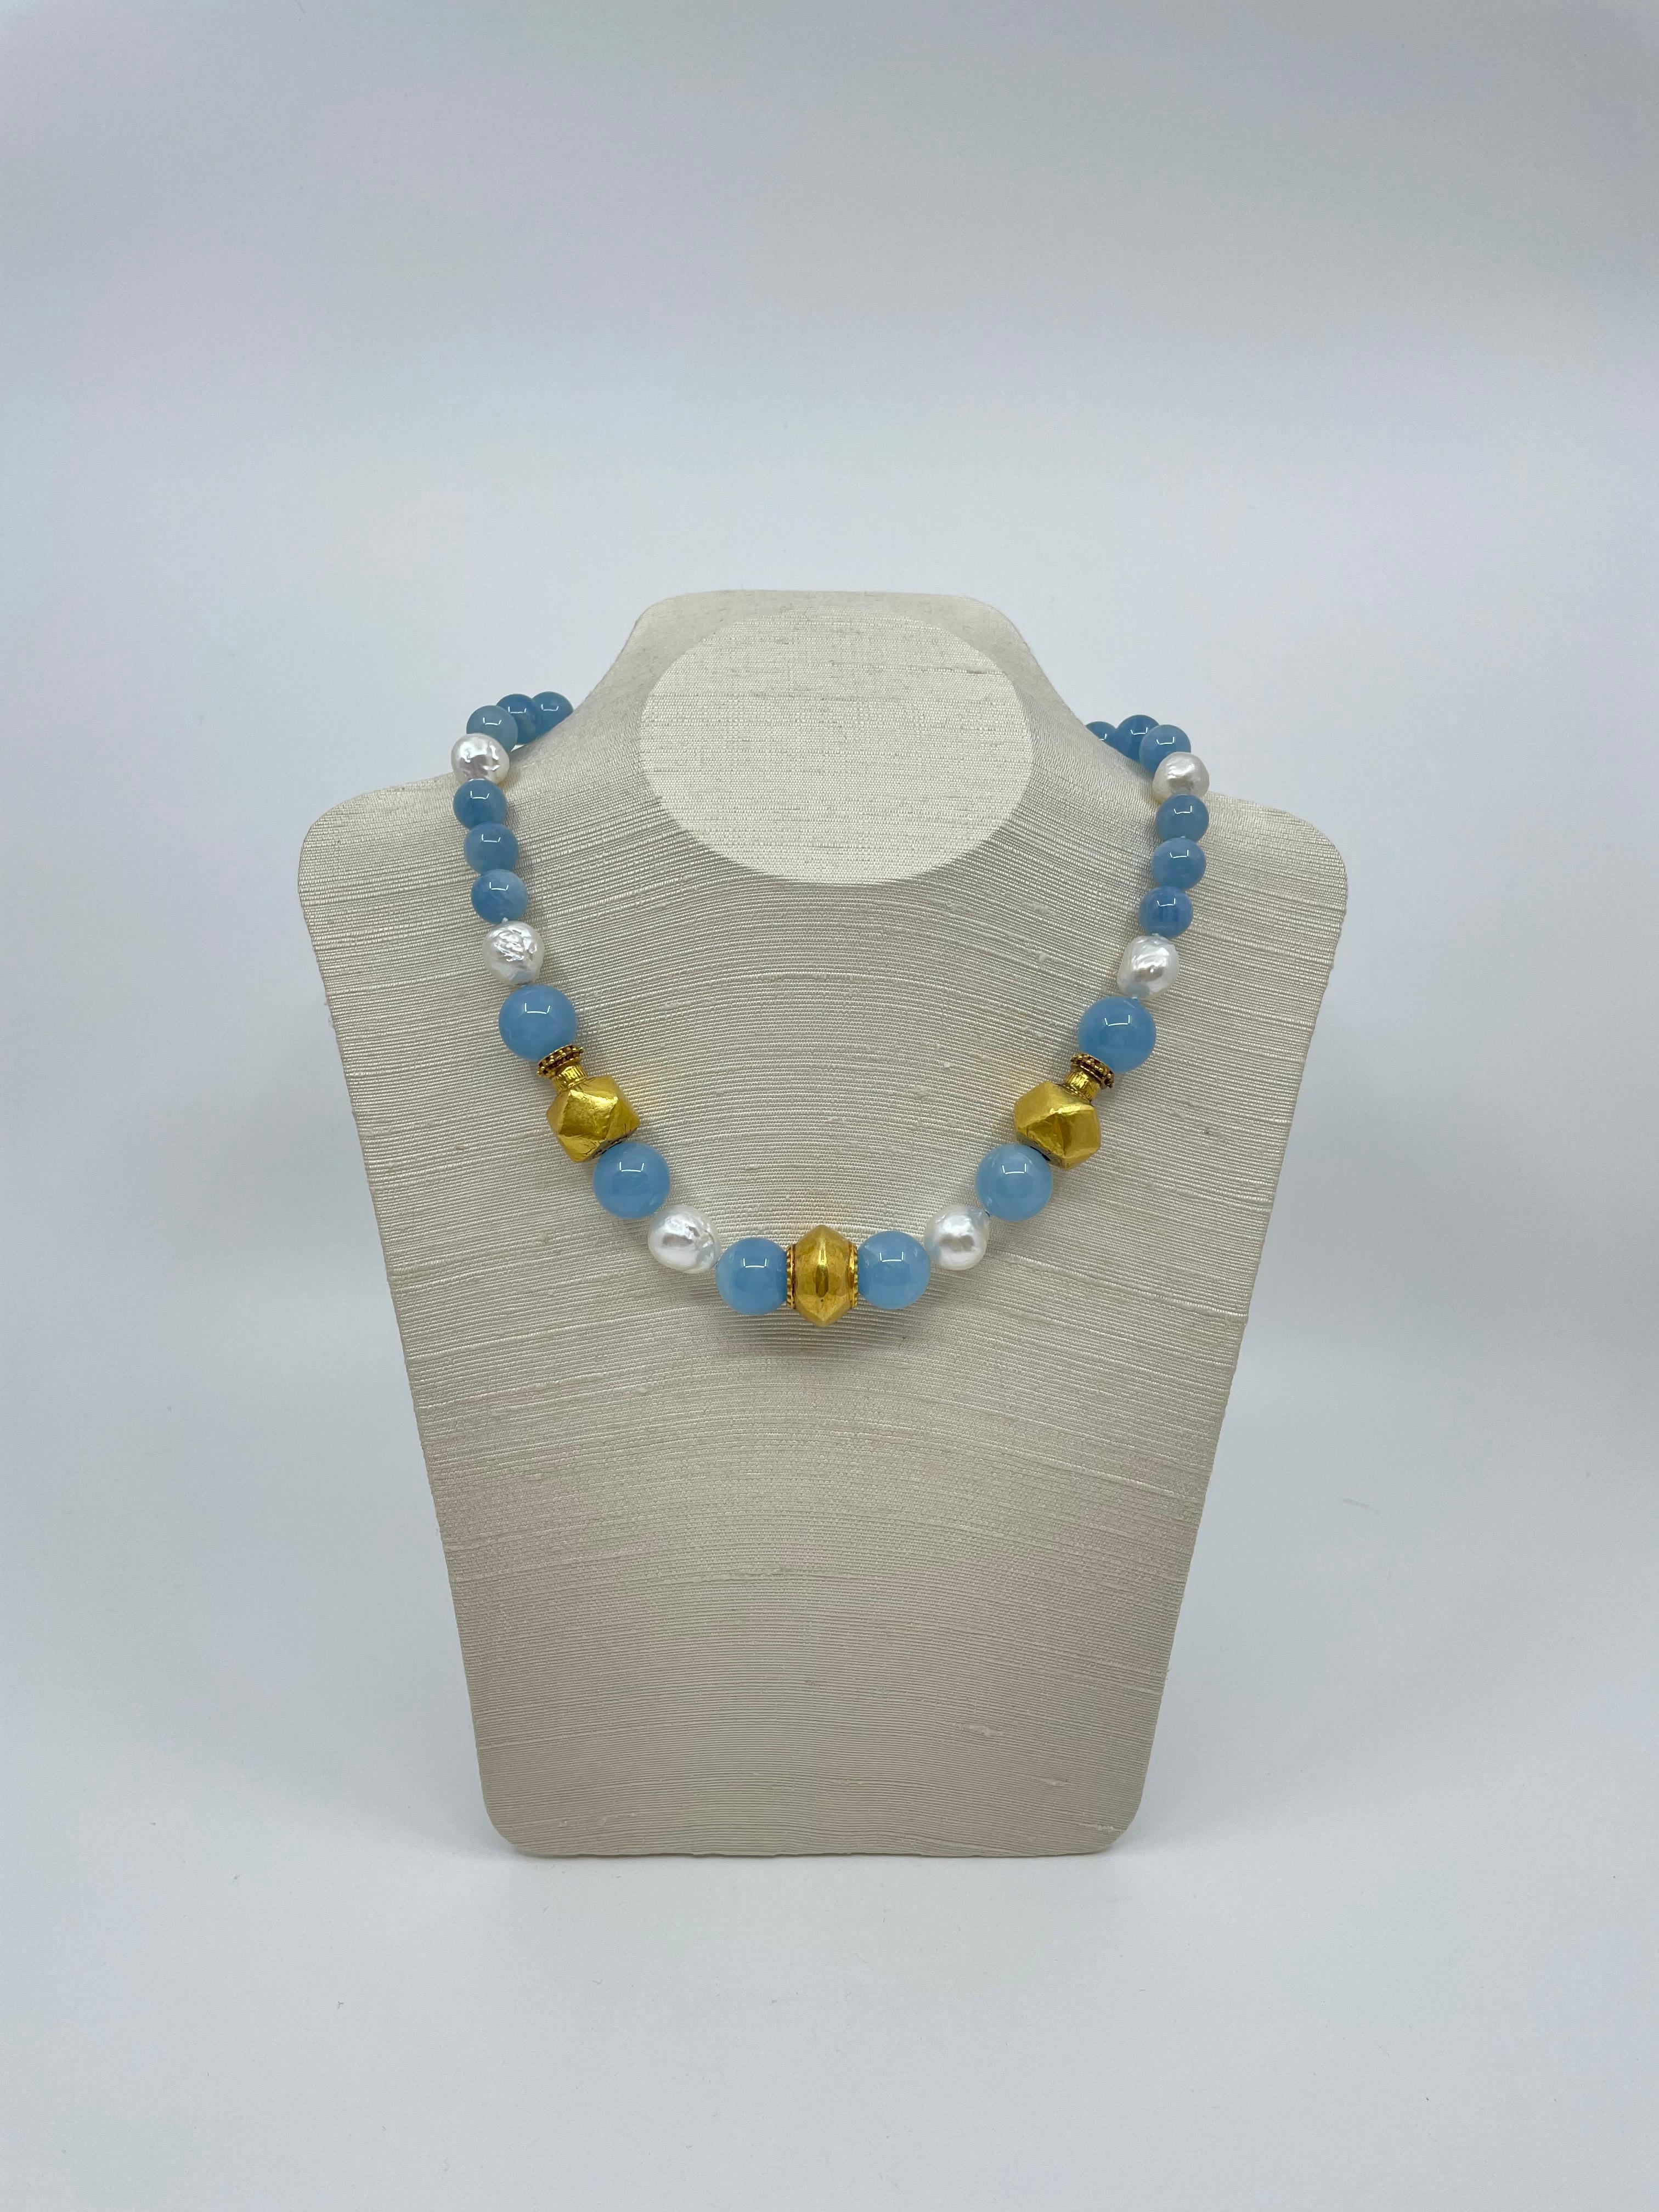 From our Amalfi collection, an exquisite hand-made necklace enchased with a set of three gold beads spaced by round soft blue aquamarine beads, South Sea pearls and 18K gold faceted beads, stunning for all occasions.

The Amalfi Collection
Evoking